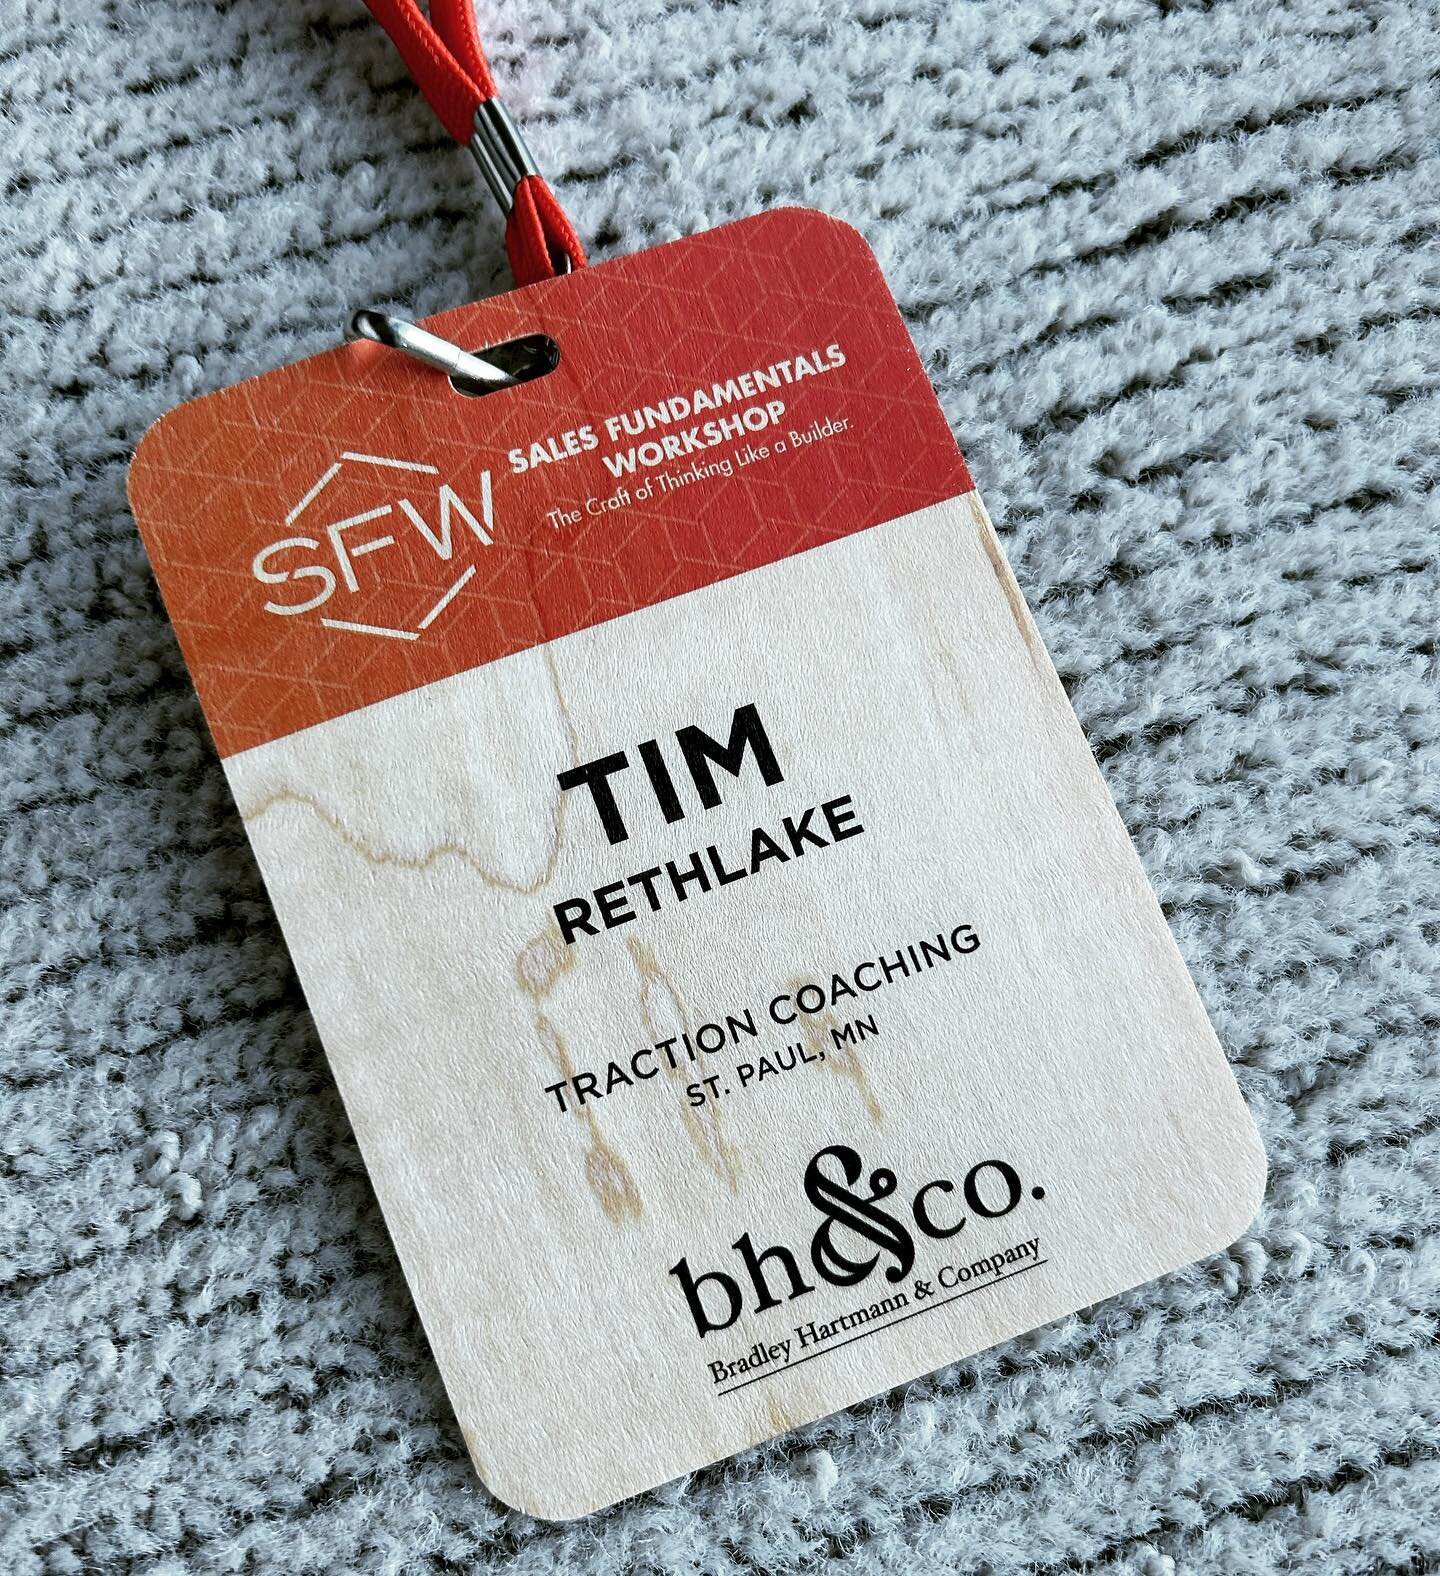 First conference name badge for TRaction Coaching. Can&rsquo;t think of a better event for it than:
#salesfundamentalsworkshop 
#bradleyhartmannandco